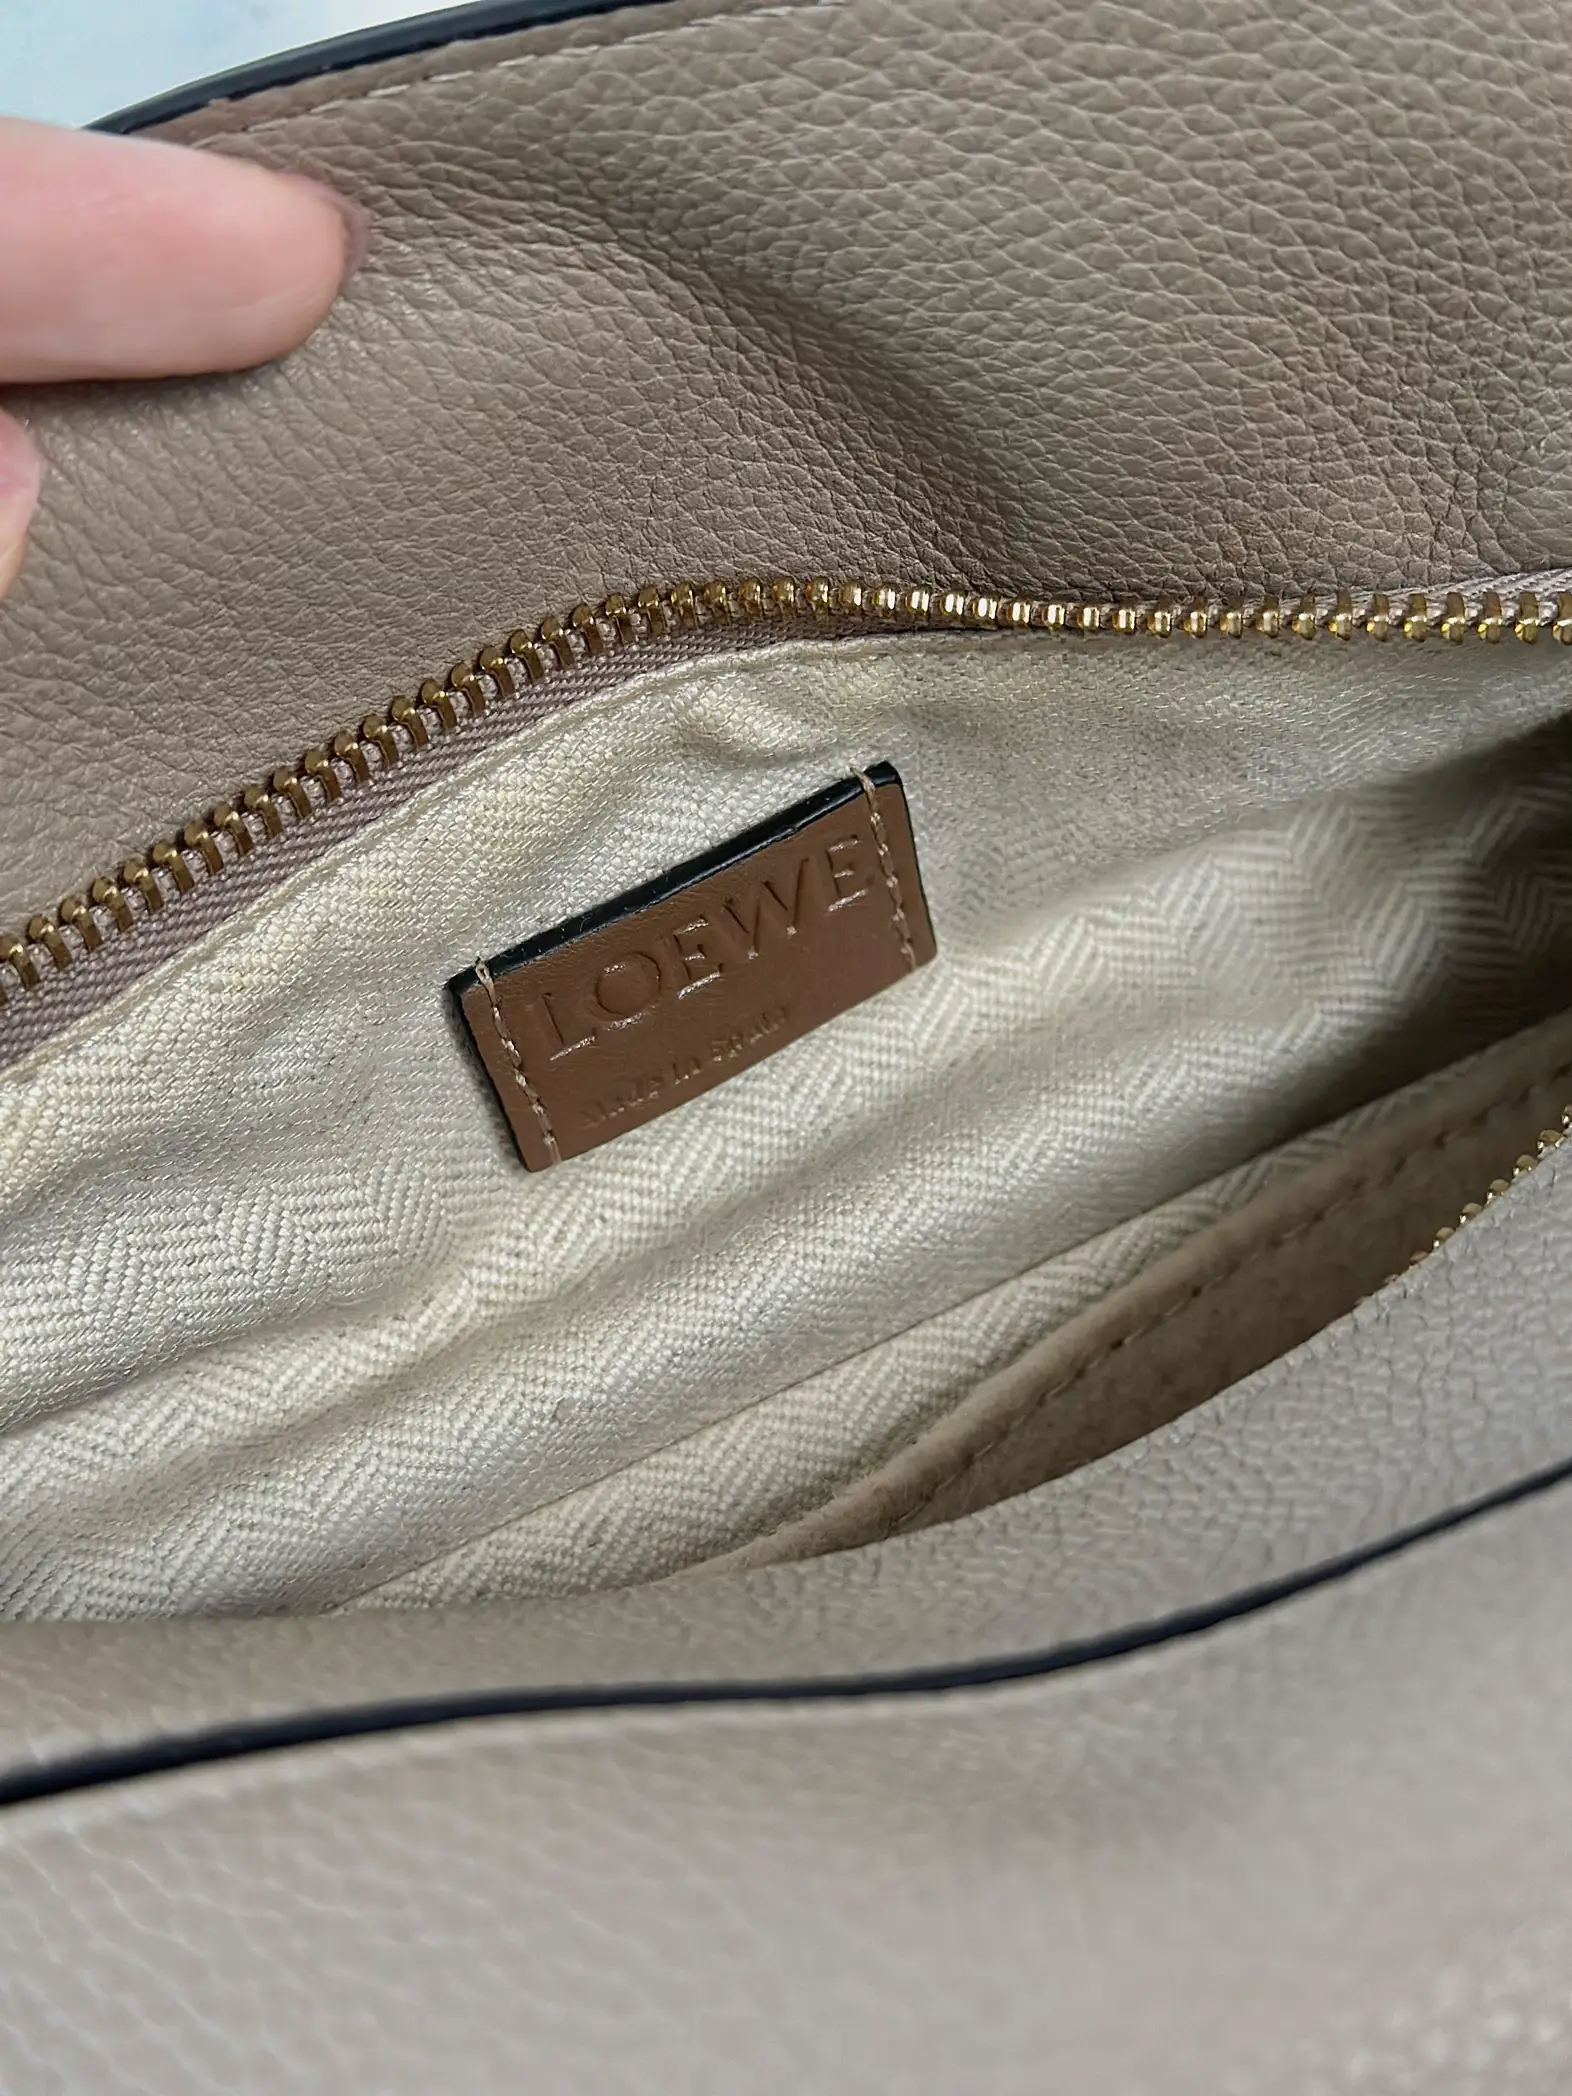 LOEWE PUZZLE BAG: What Fits in a Mini + 1 Year-Review